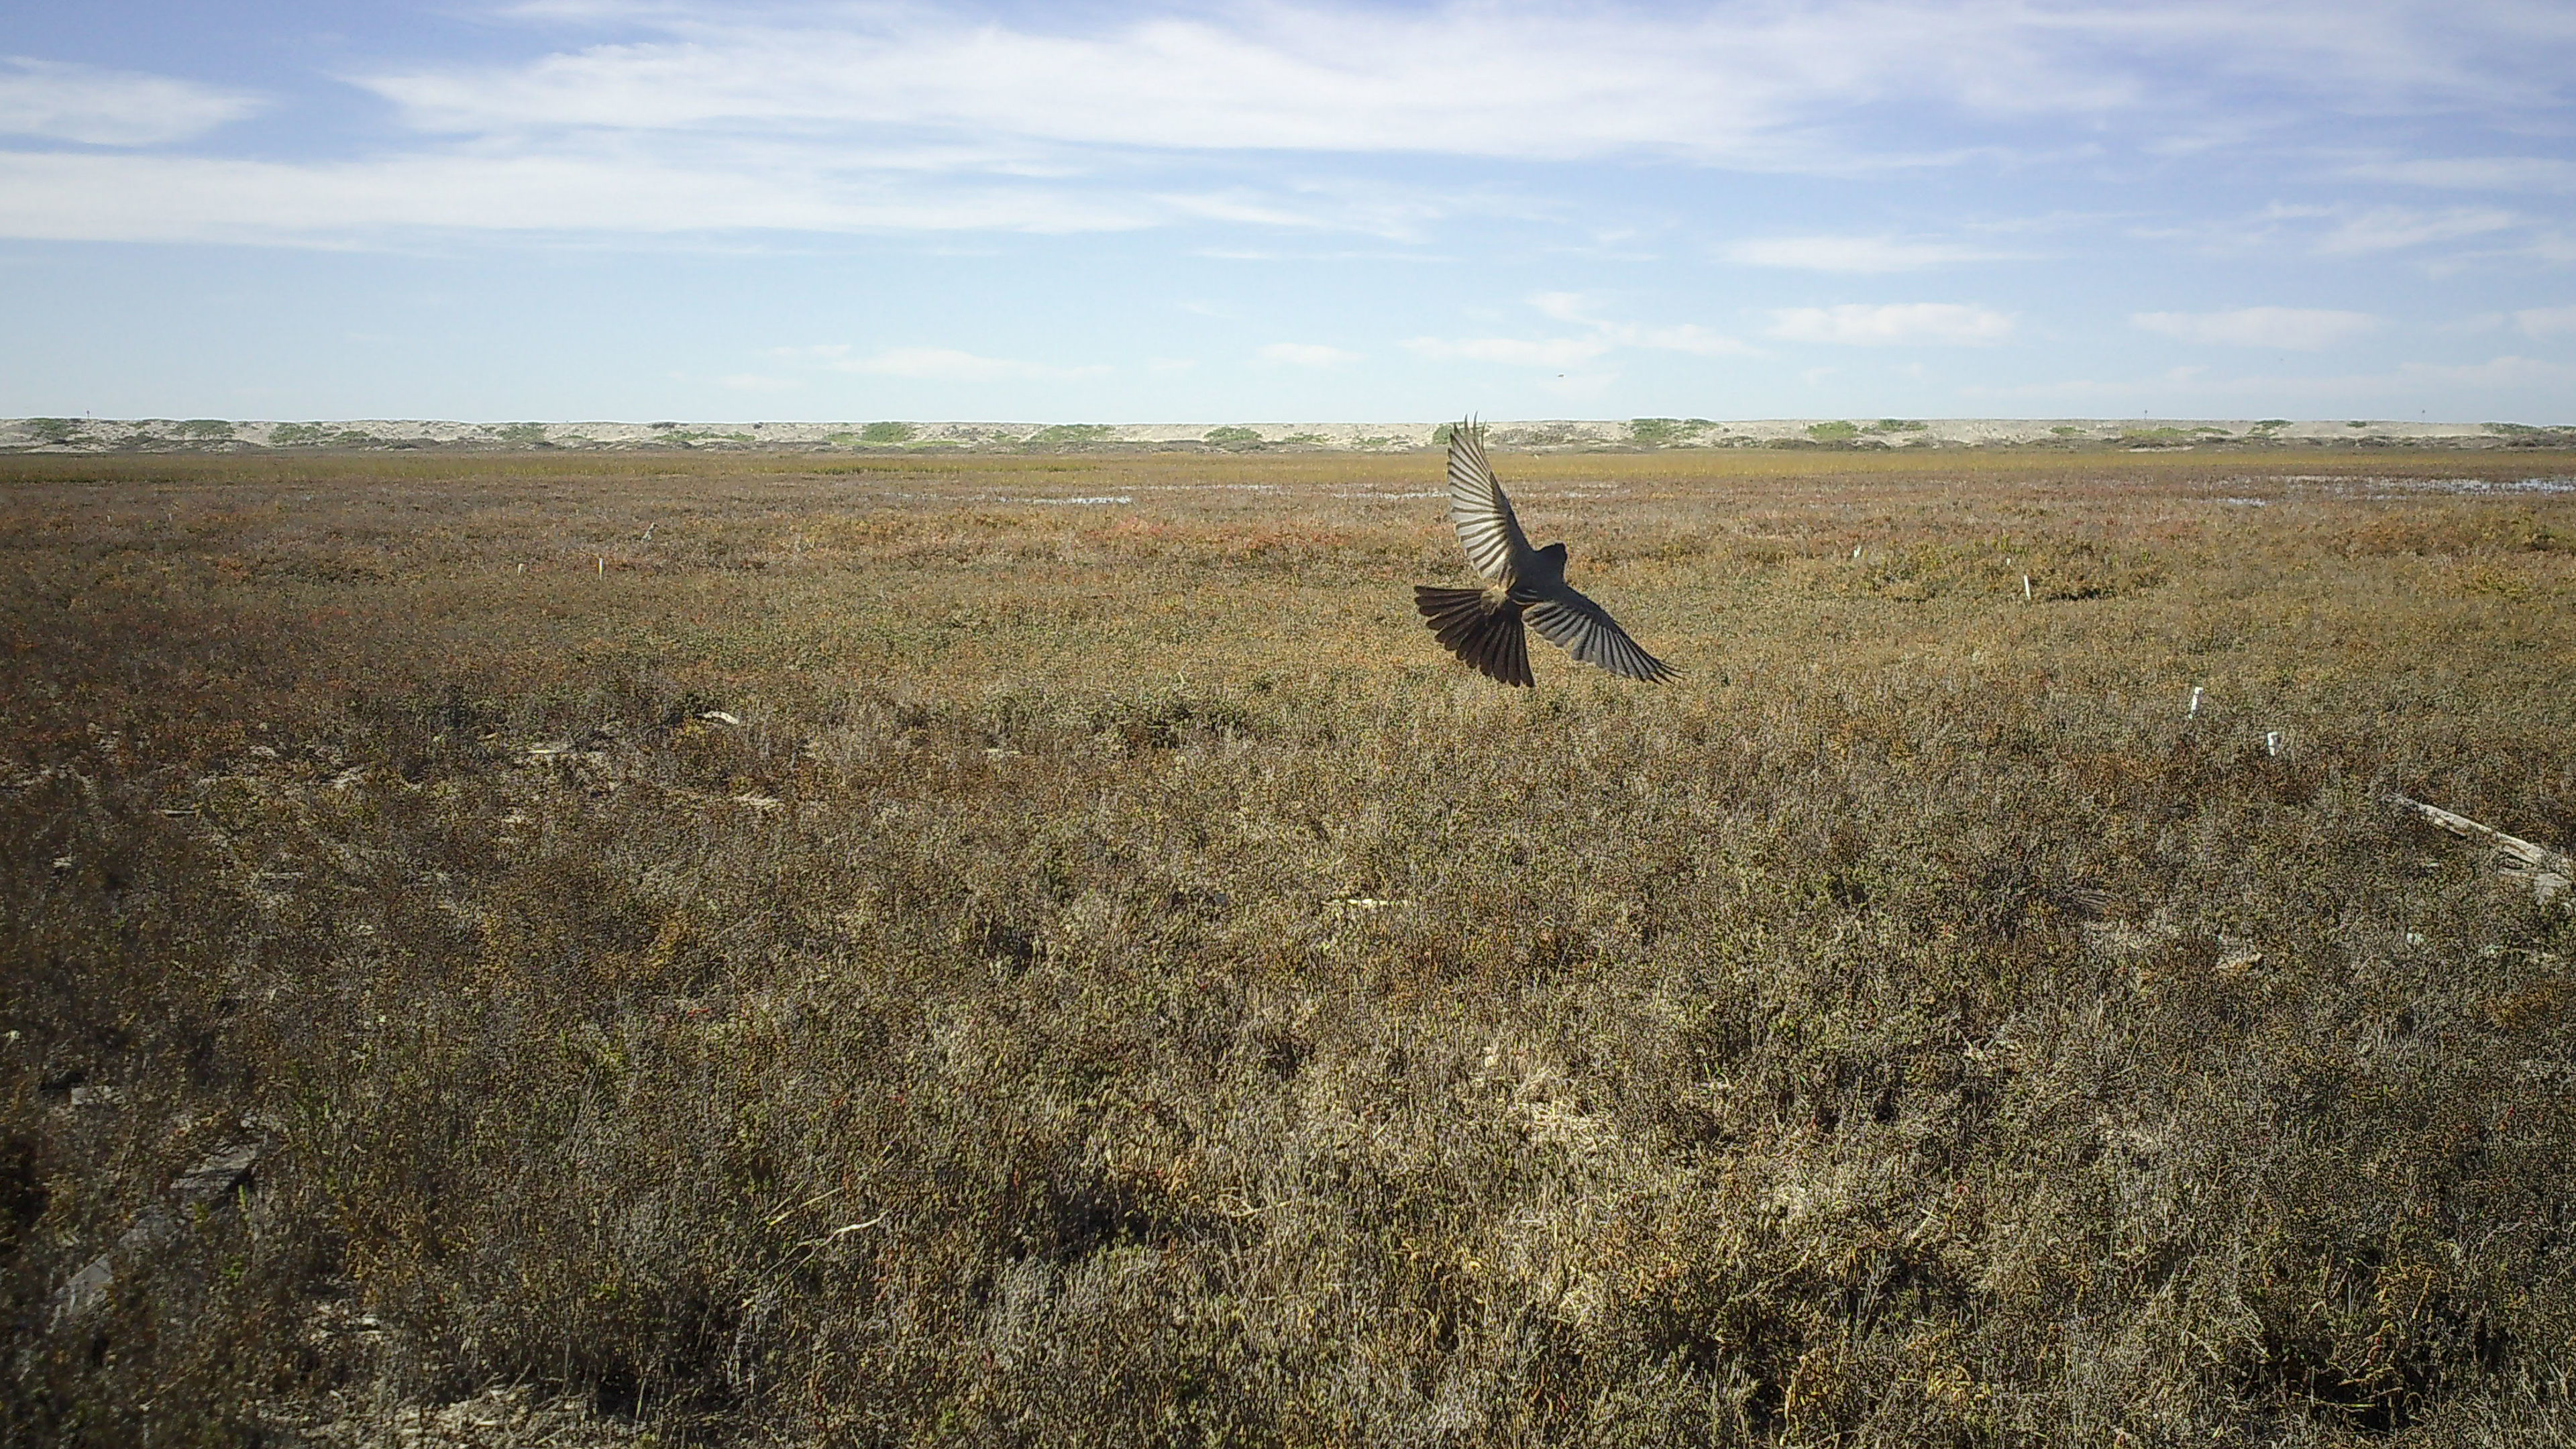 A brown bird, with wings and tail feathers outstretched, flies a few feet above a broad expanse of brown and gray grasses, with a low sandy hillside in the distant background. 